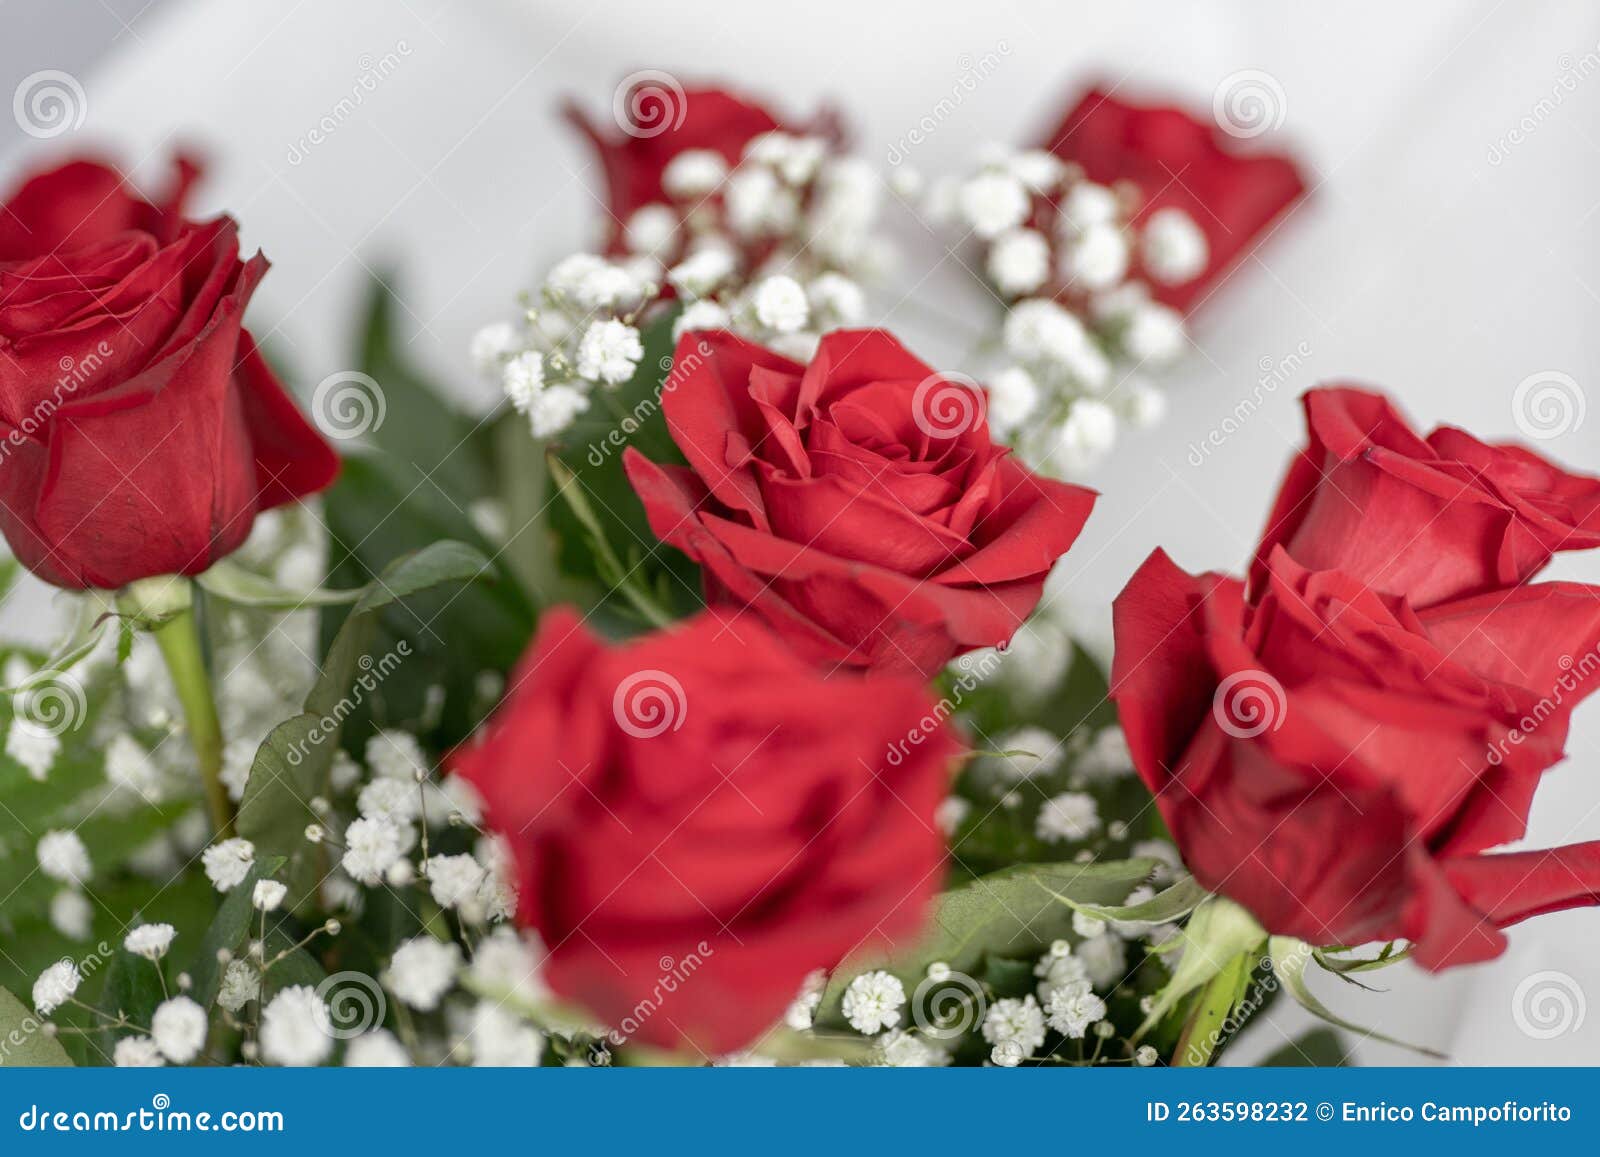 red roses and white micro flowers bouquet detail